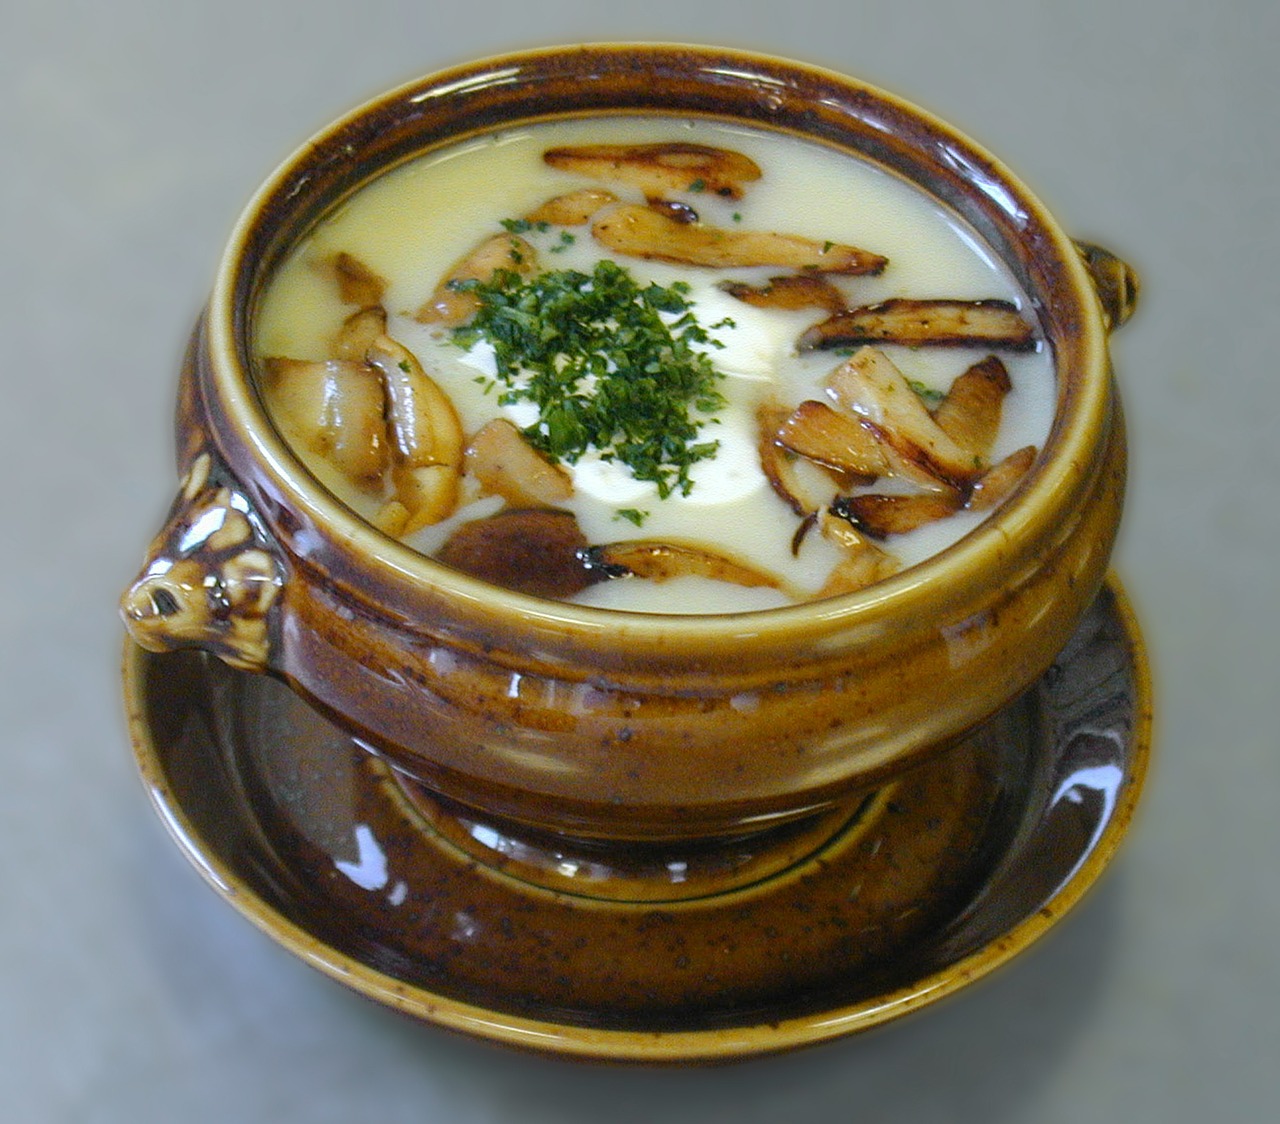 Caramelized Turnip and Apple Soup With Tarragon Sour Cream